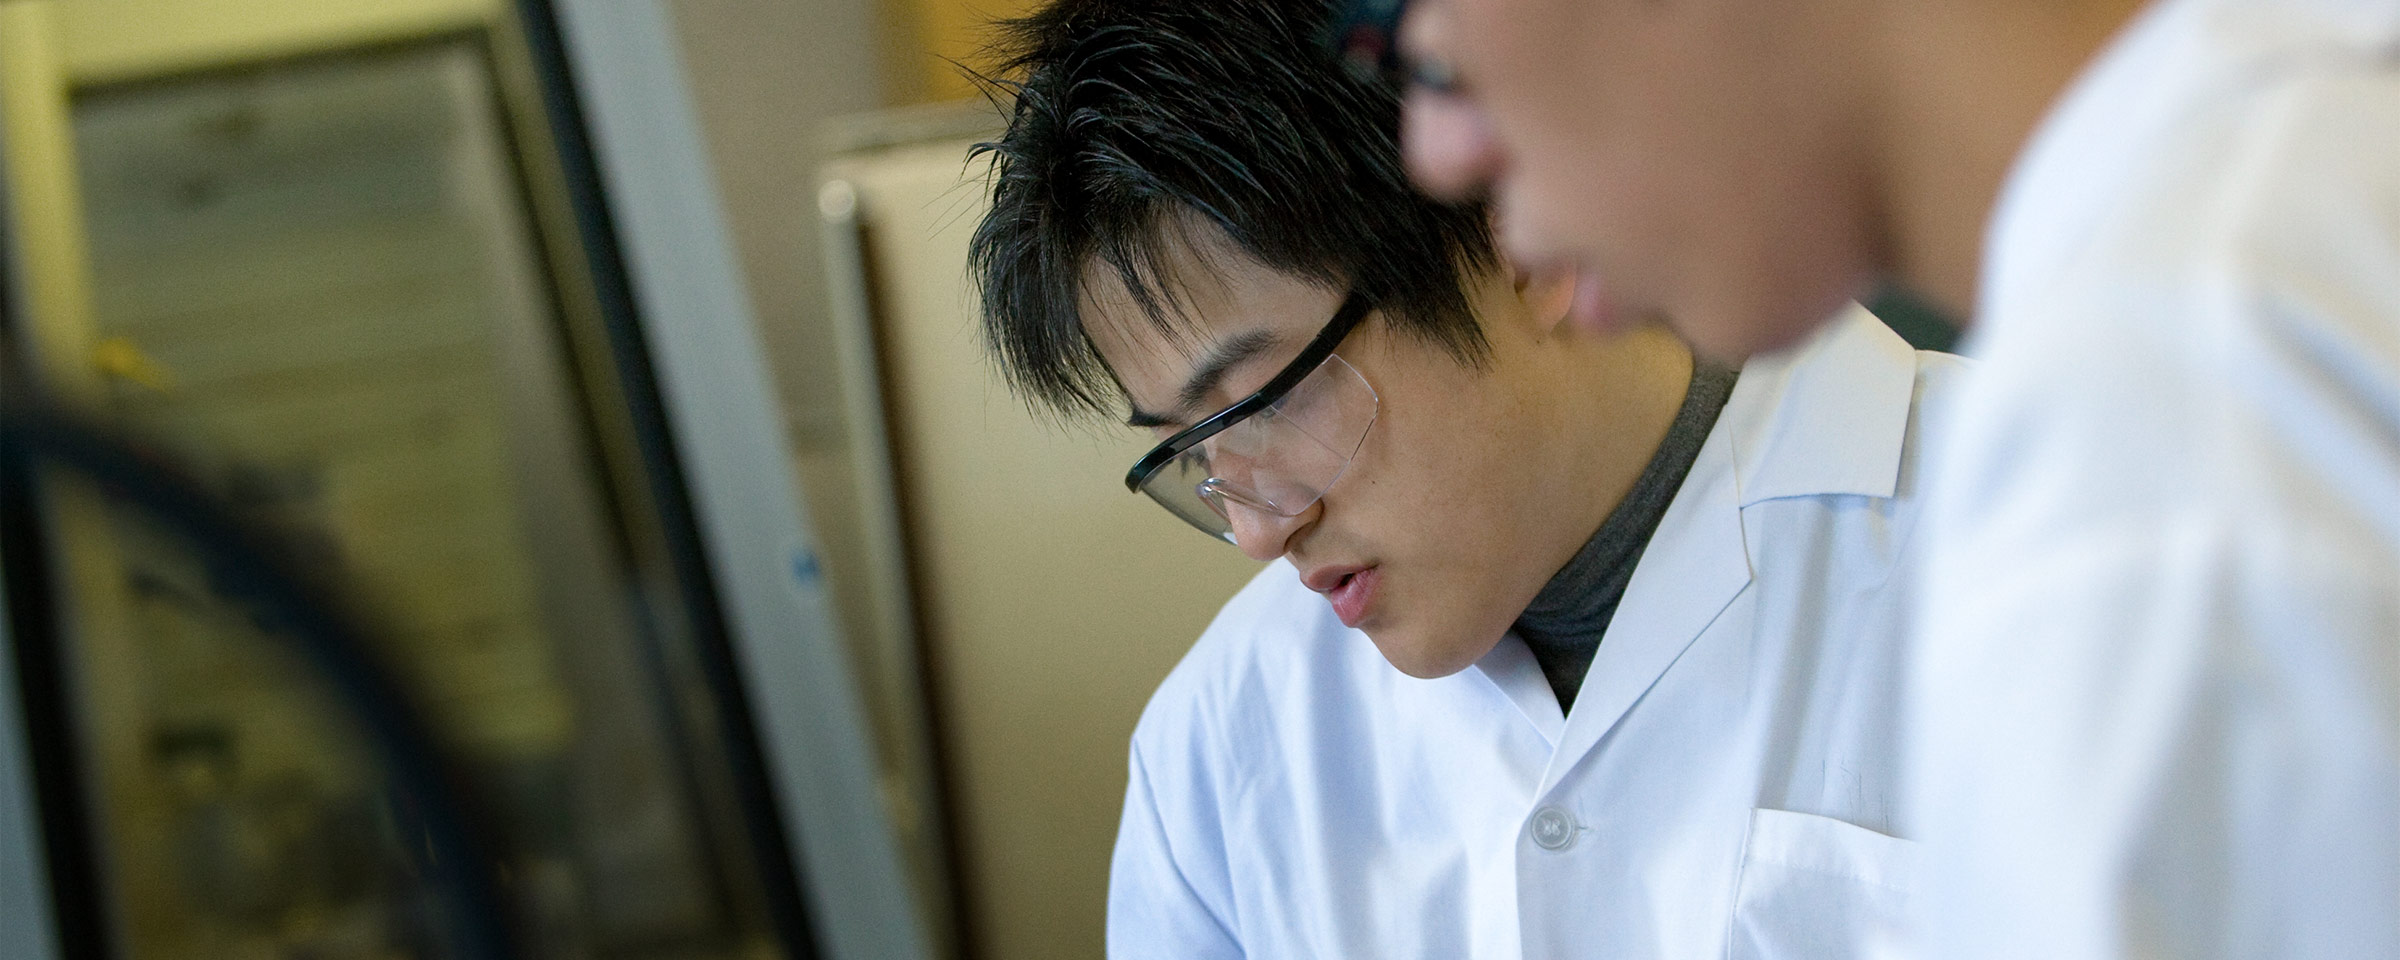 Two male students working in lab coats